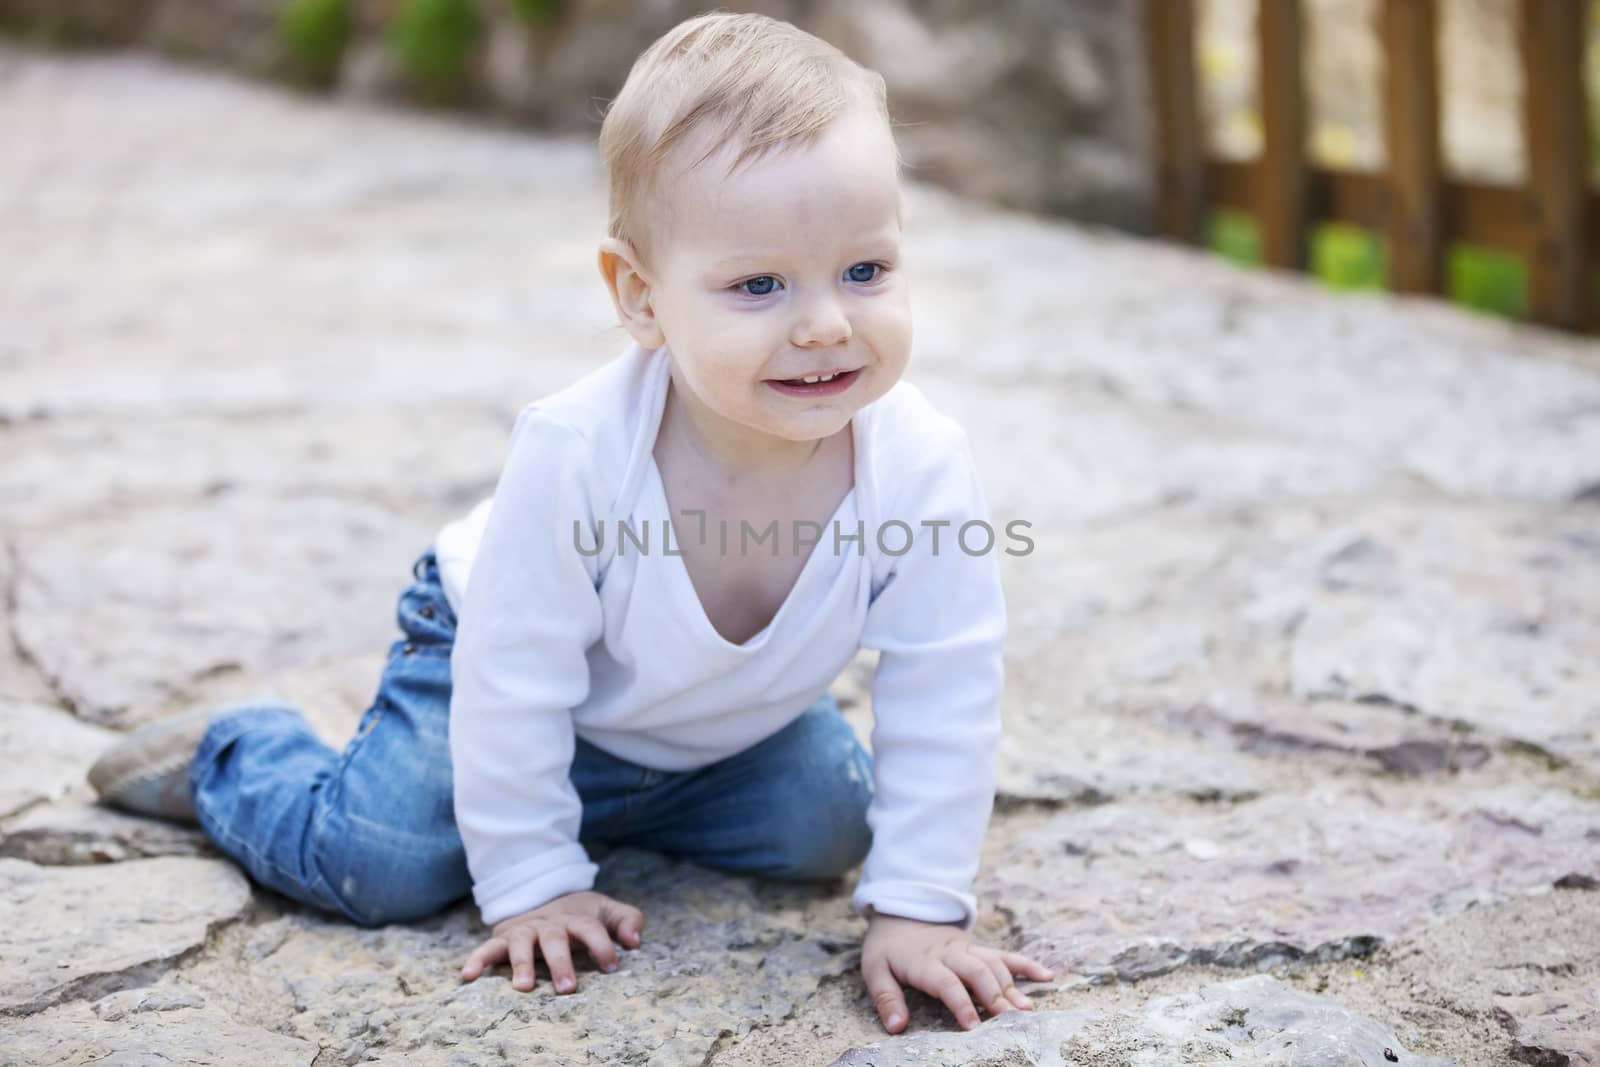 Cute little boy looking up and smiling while crawling on stone paved sidewalk